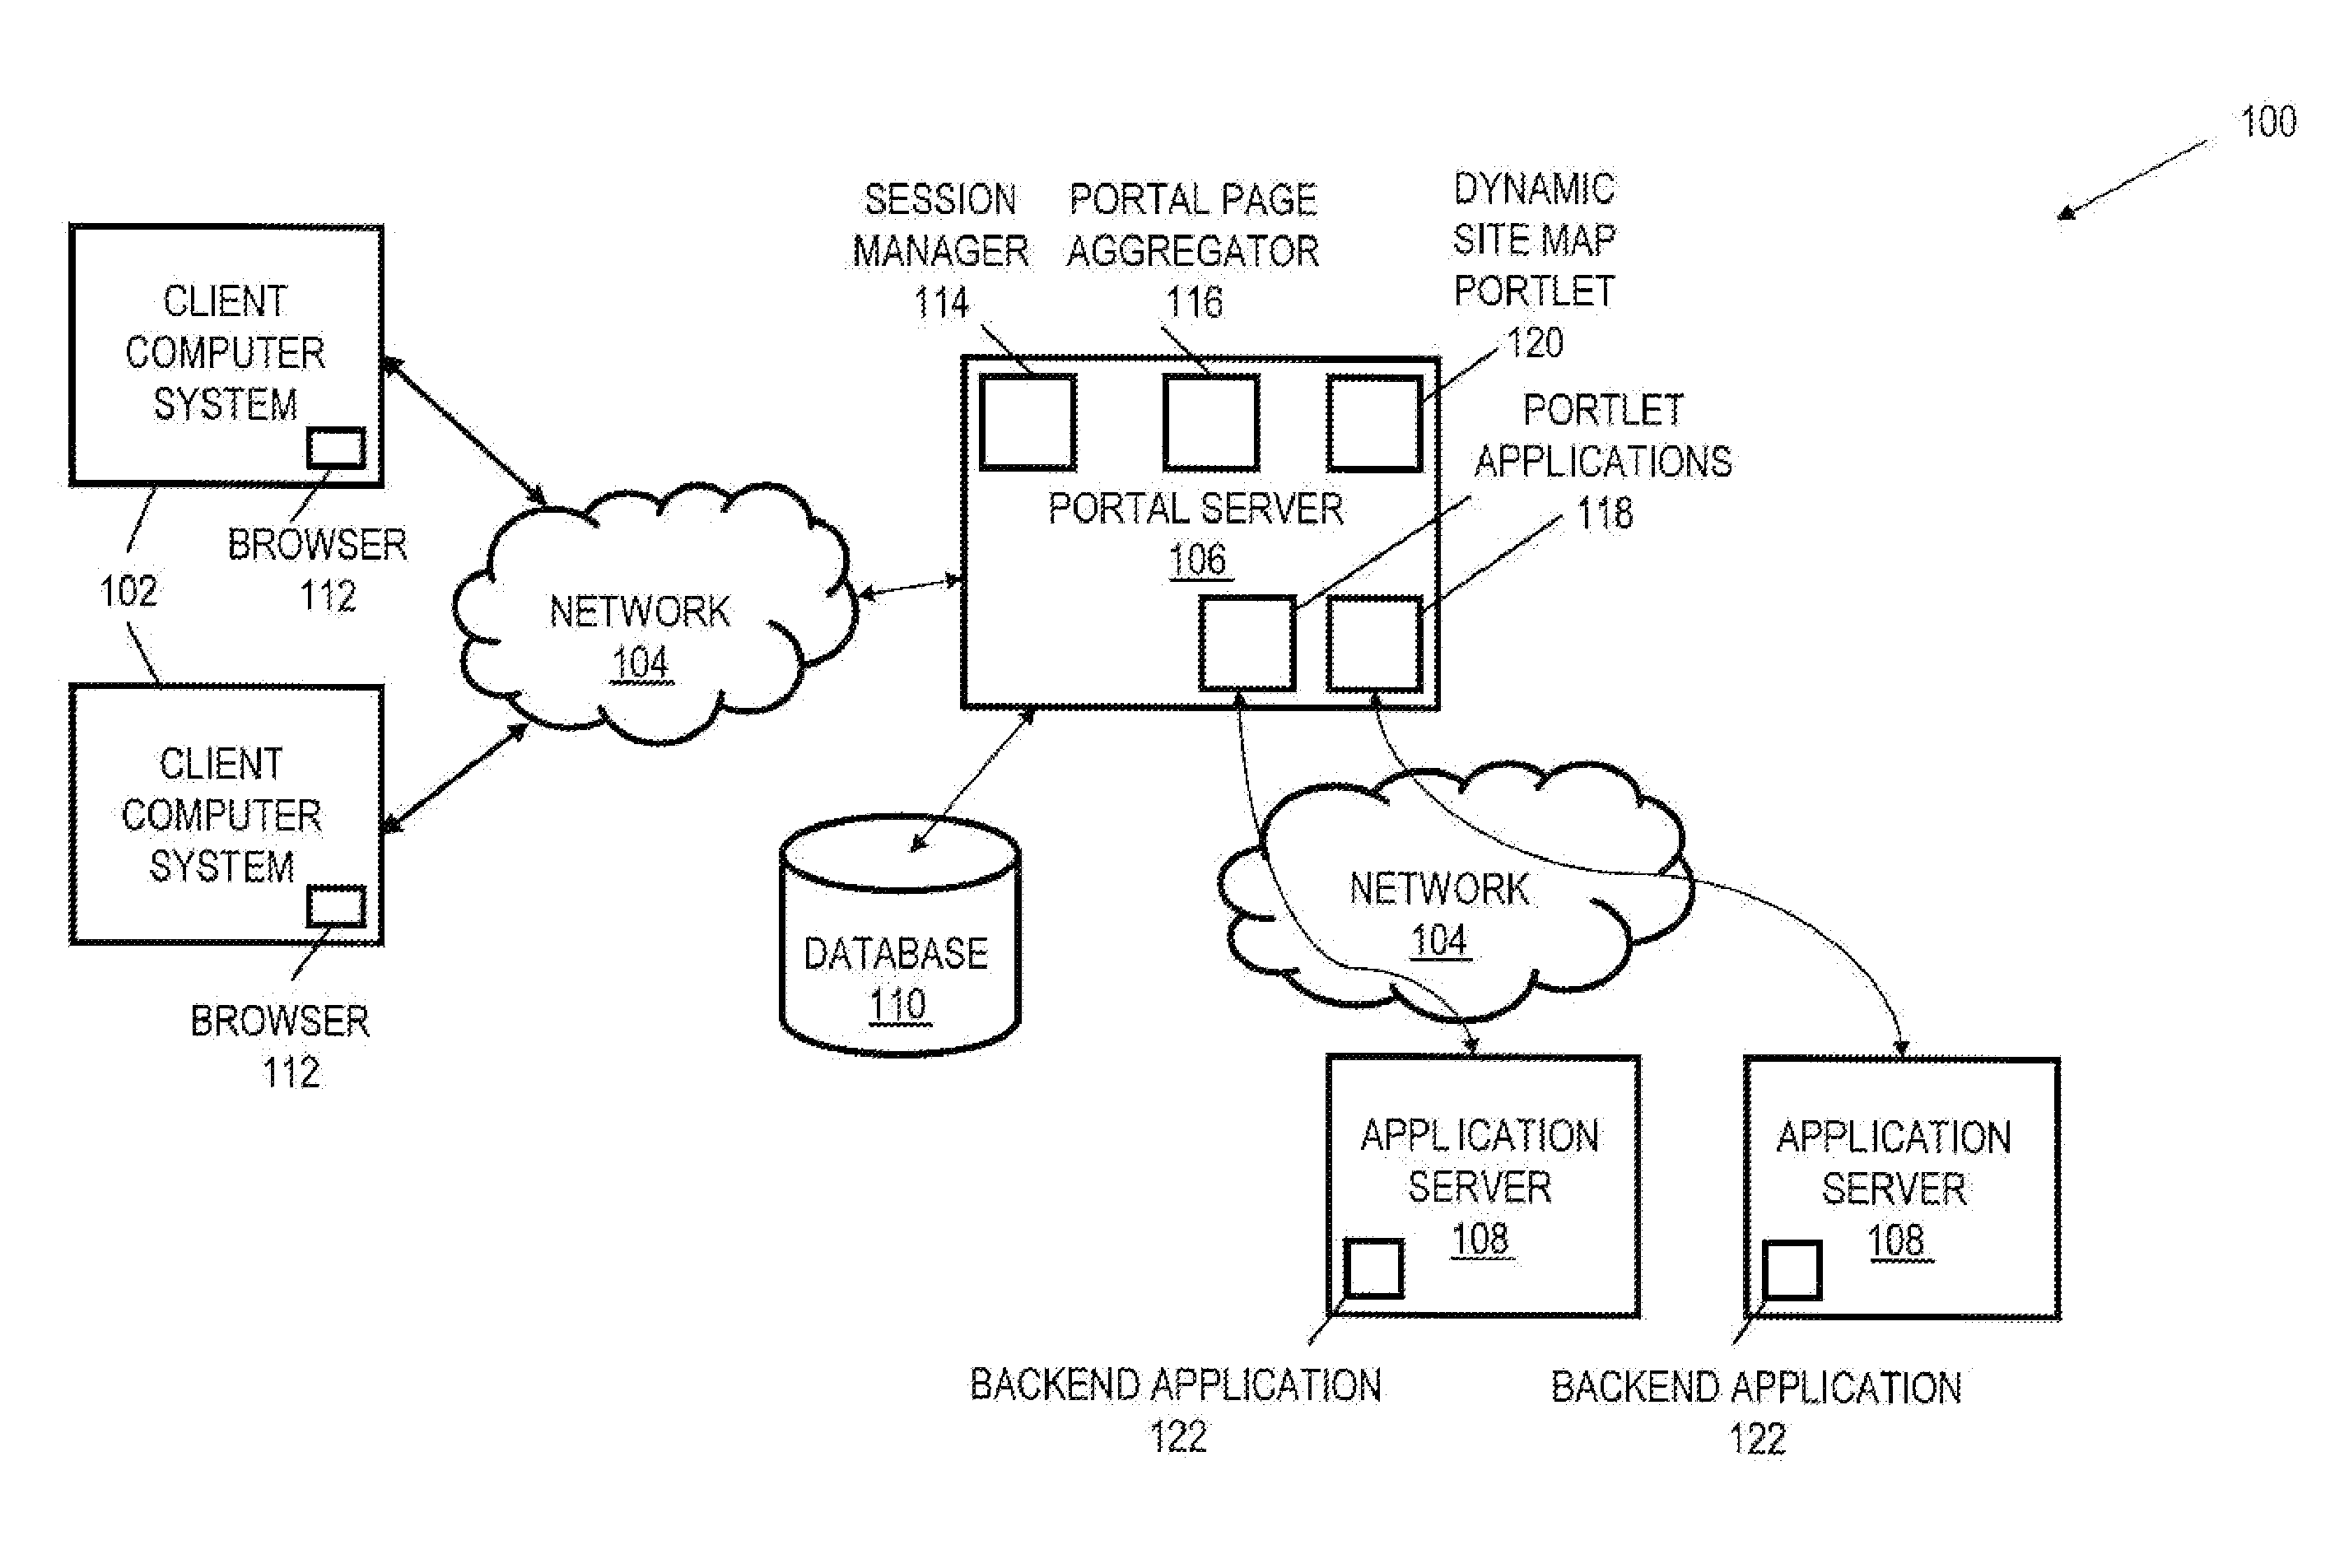 Systems, Methods, and Media for Dynamically Generating a Portal Site Map